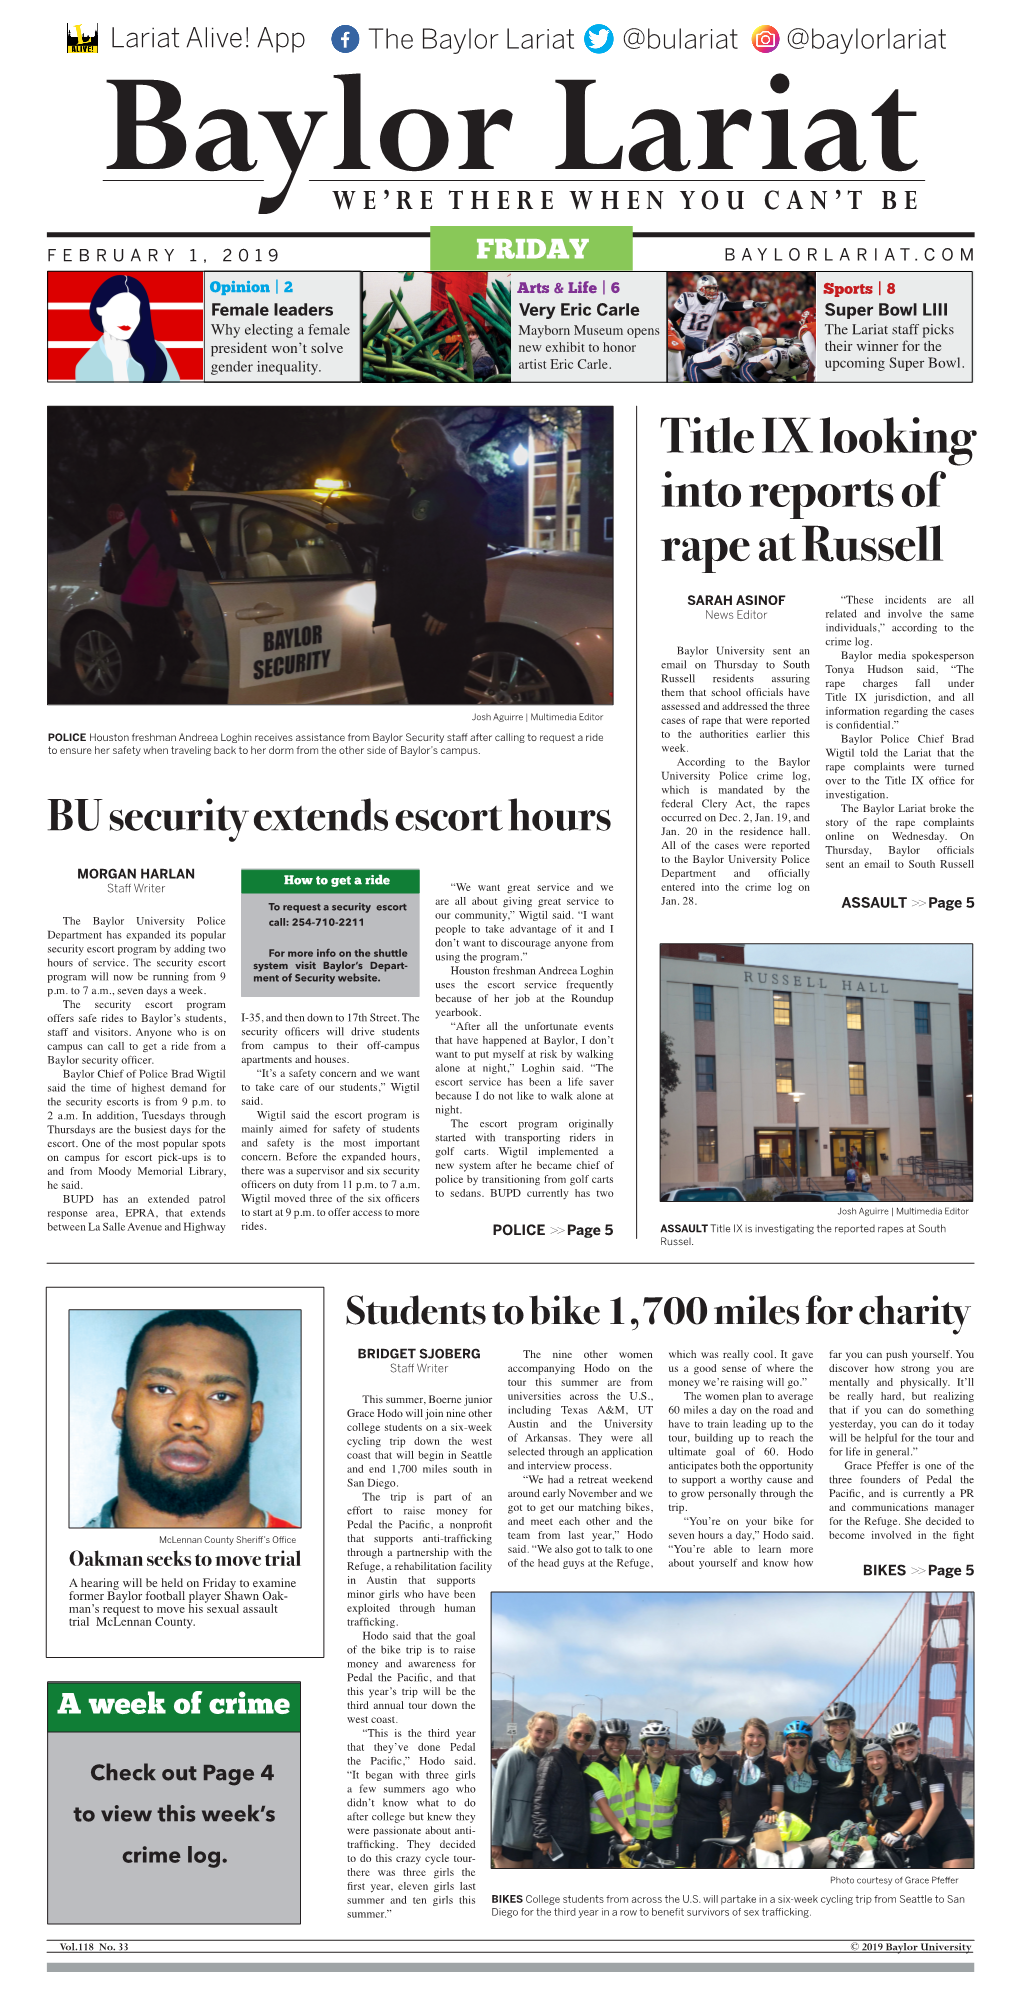 Title IX Looking Into Reports of Rape at Russell